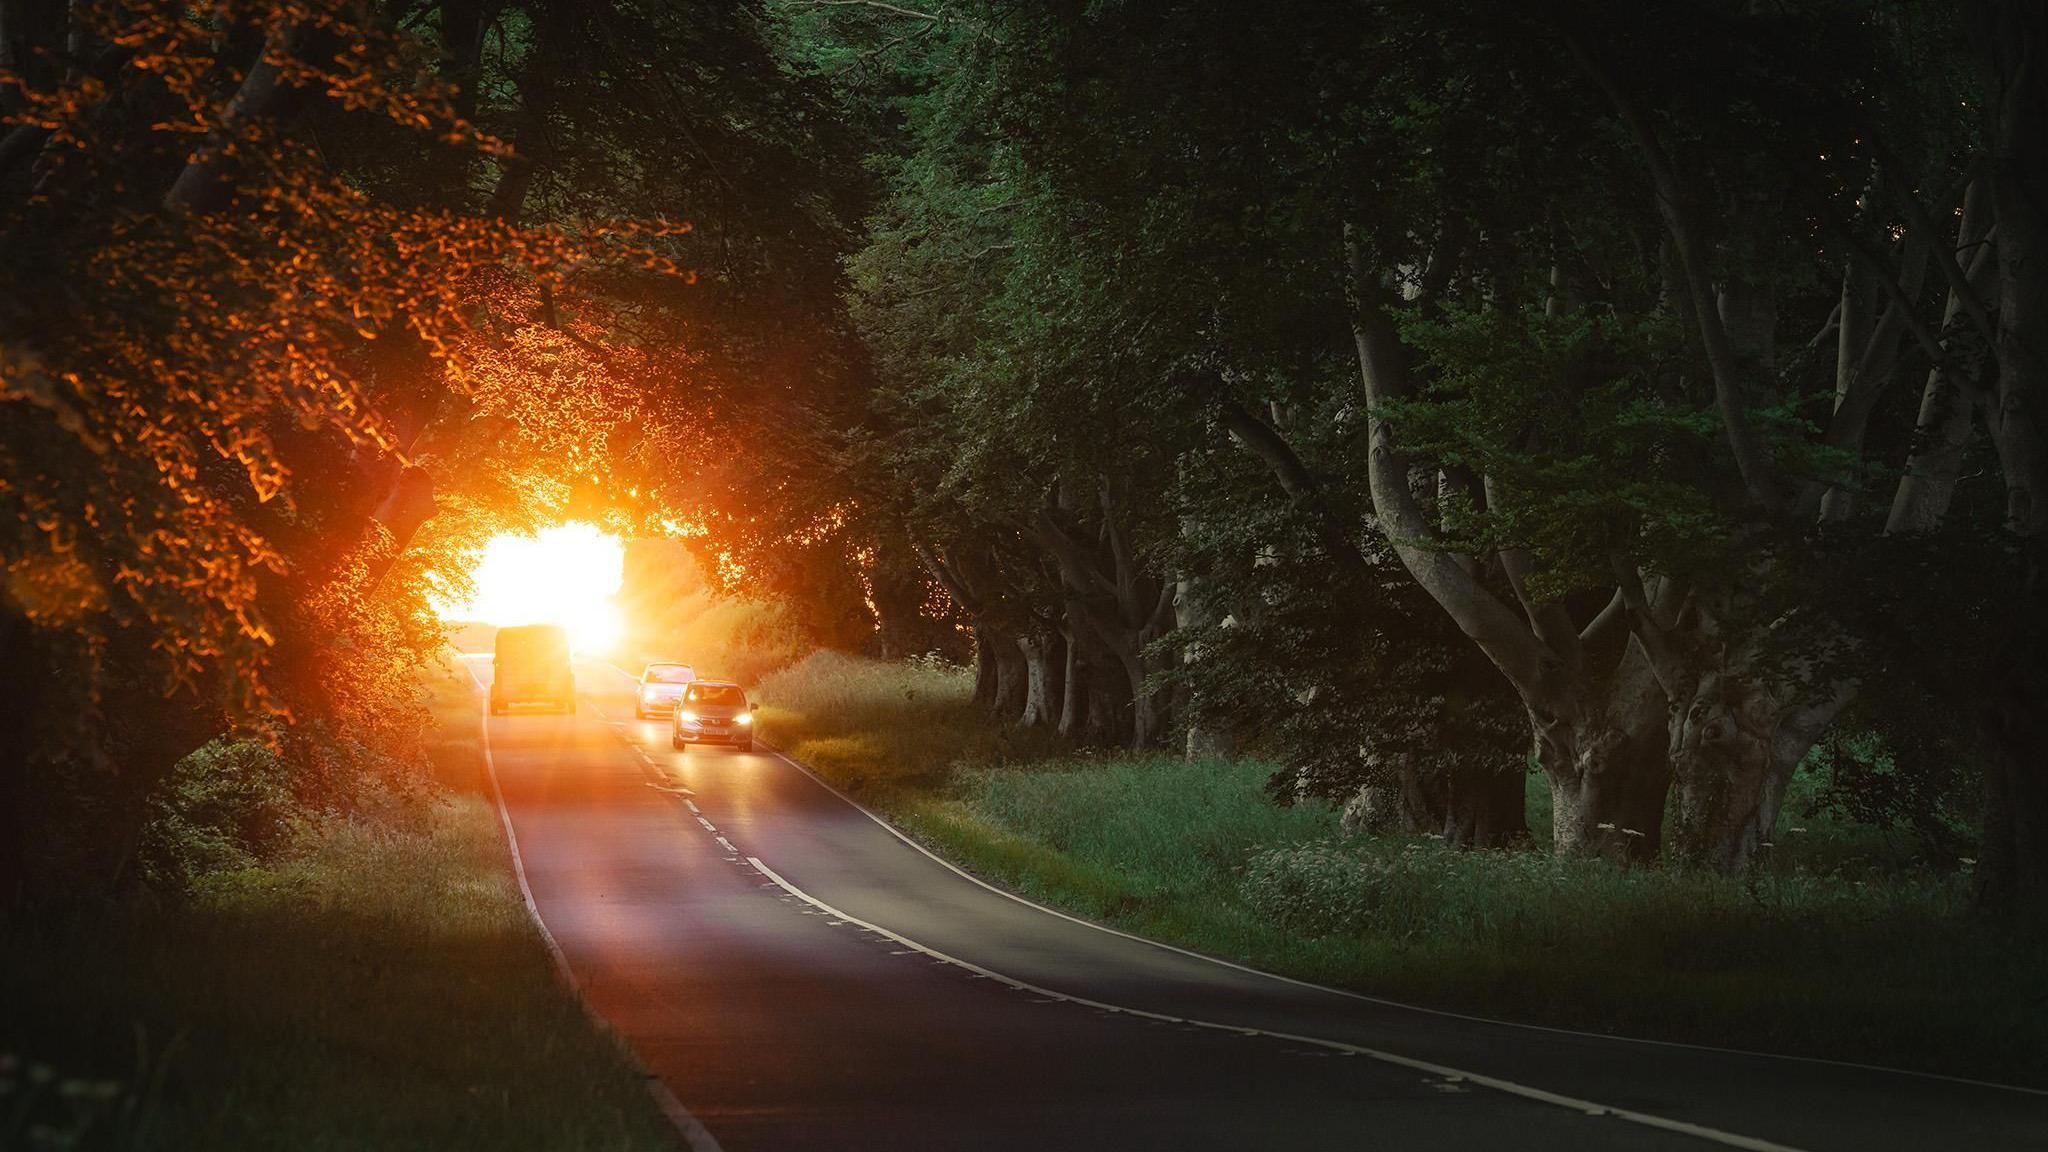 THURSDAY - Sun streams through the trees as cars drive along the road under a canopy of Beech trees